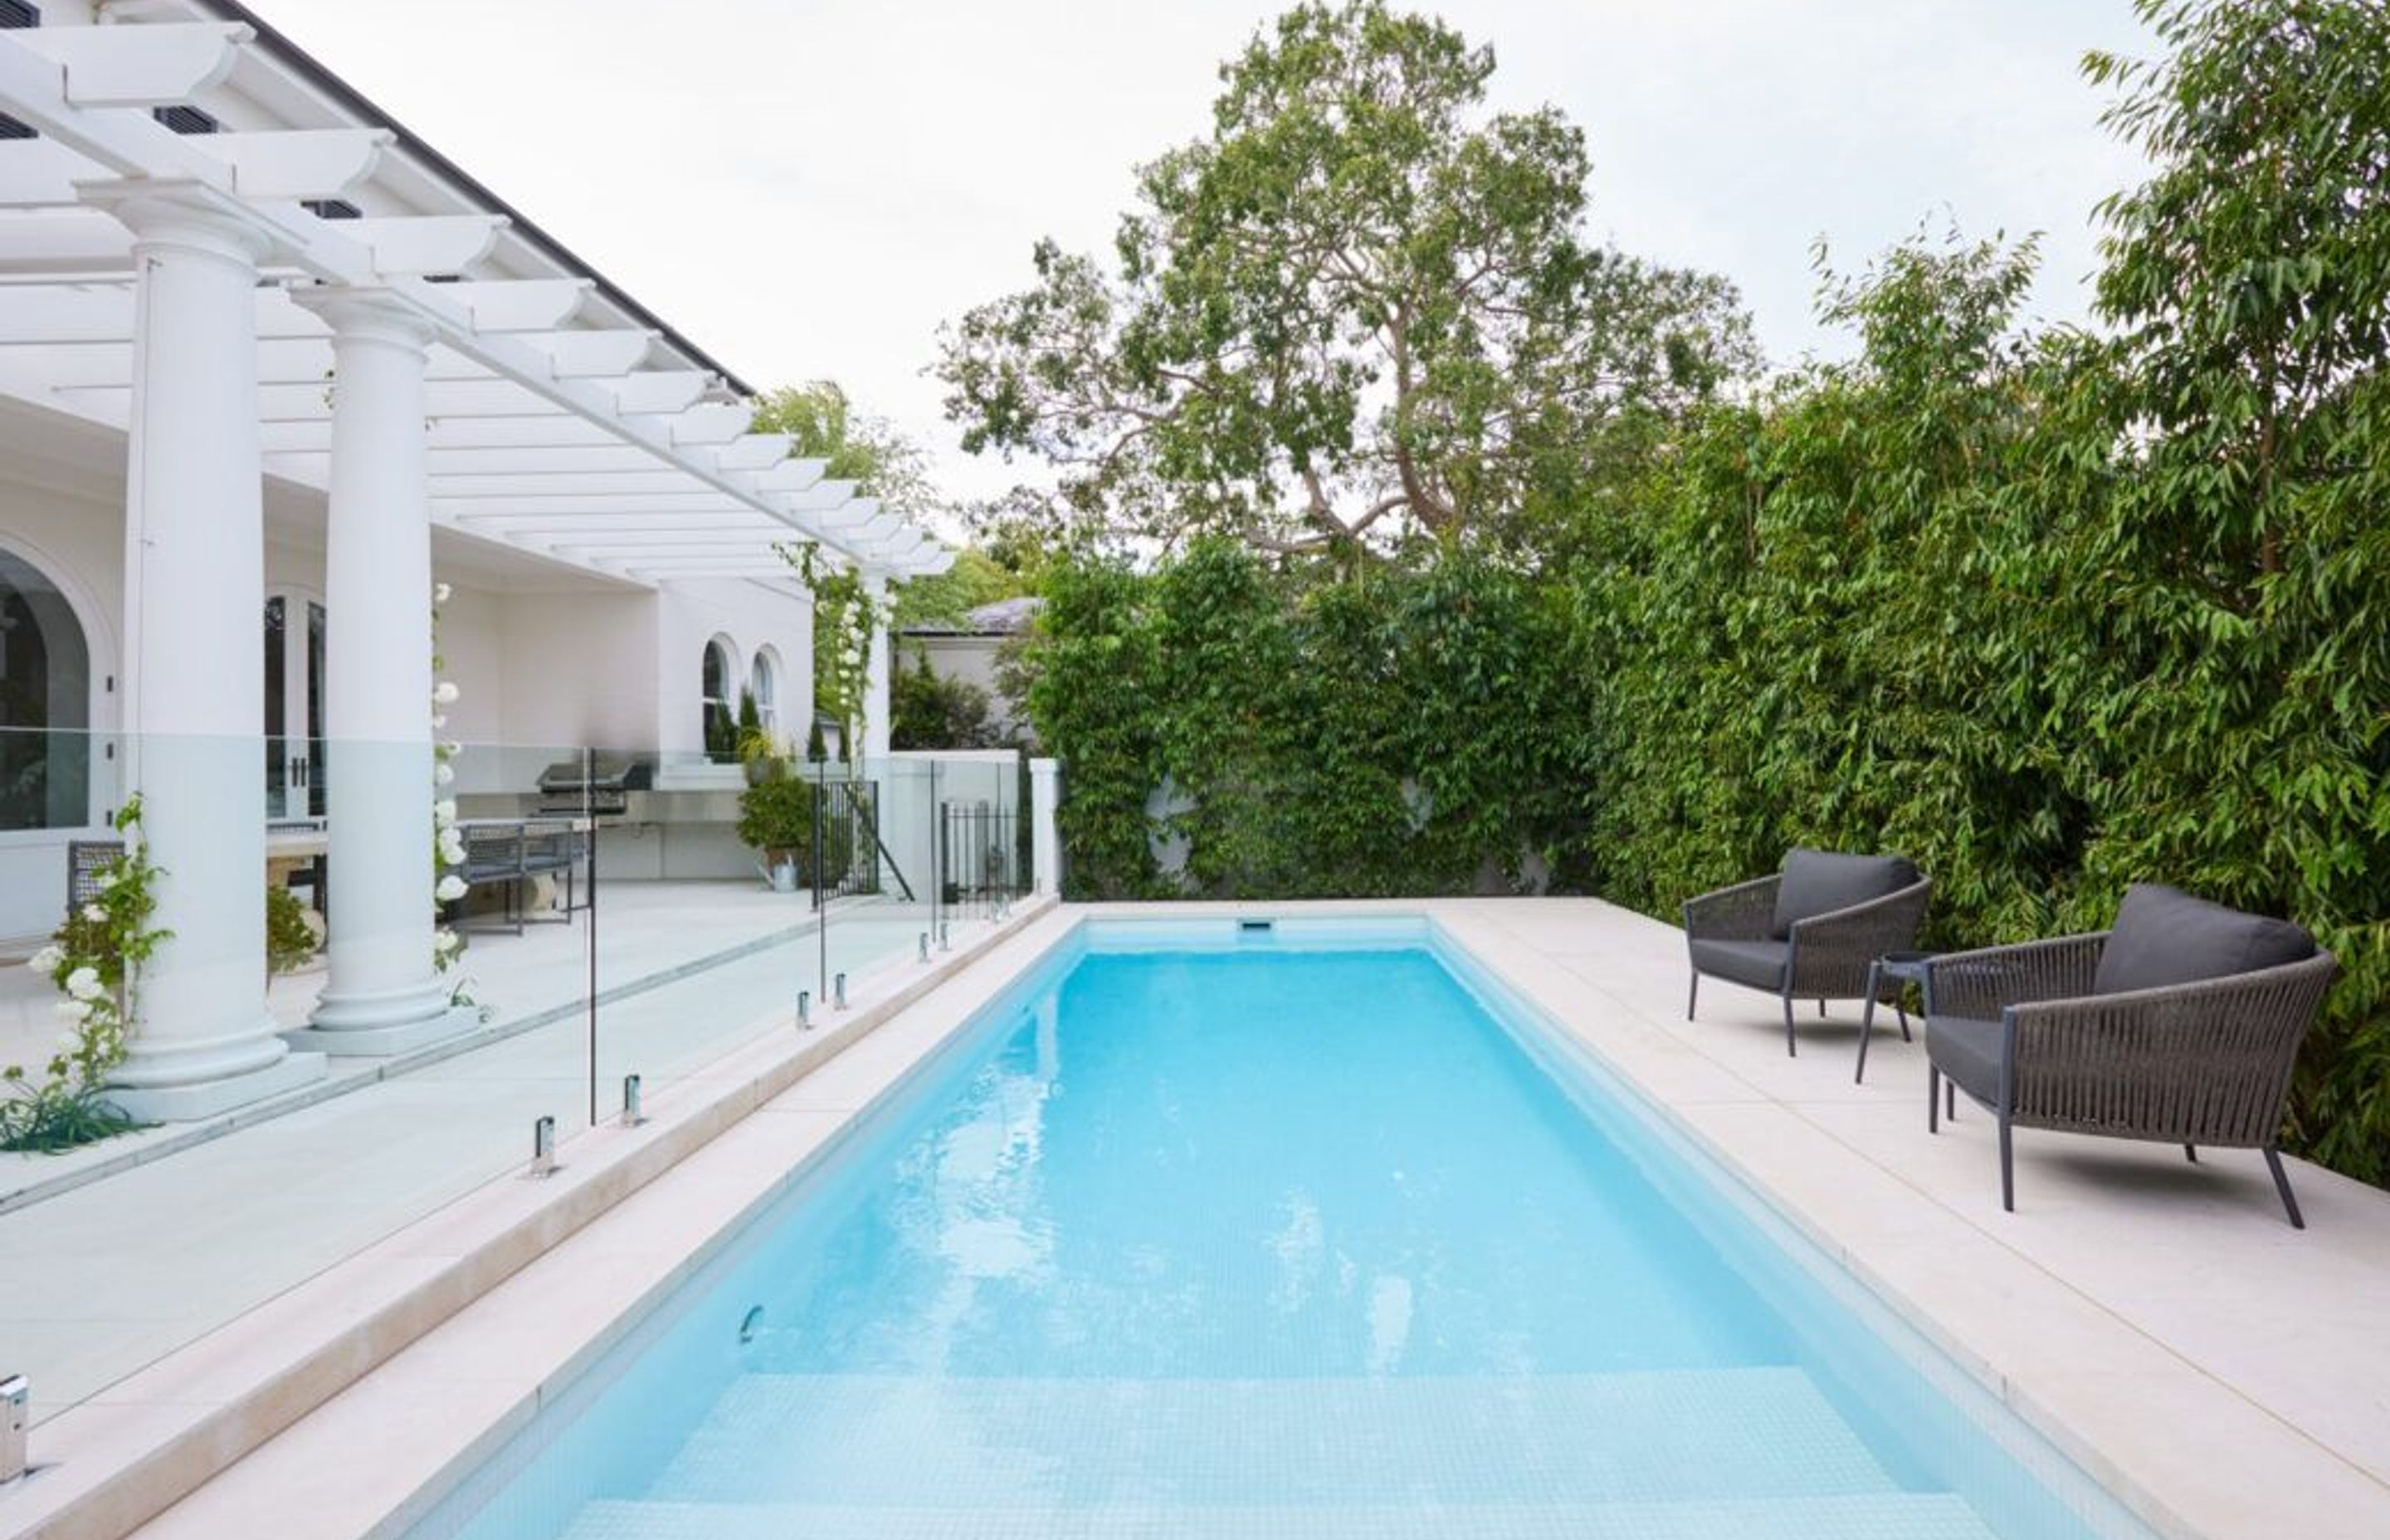 Woollahra House: A Case Study